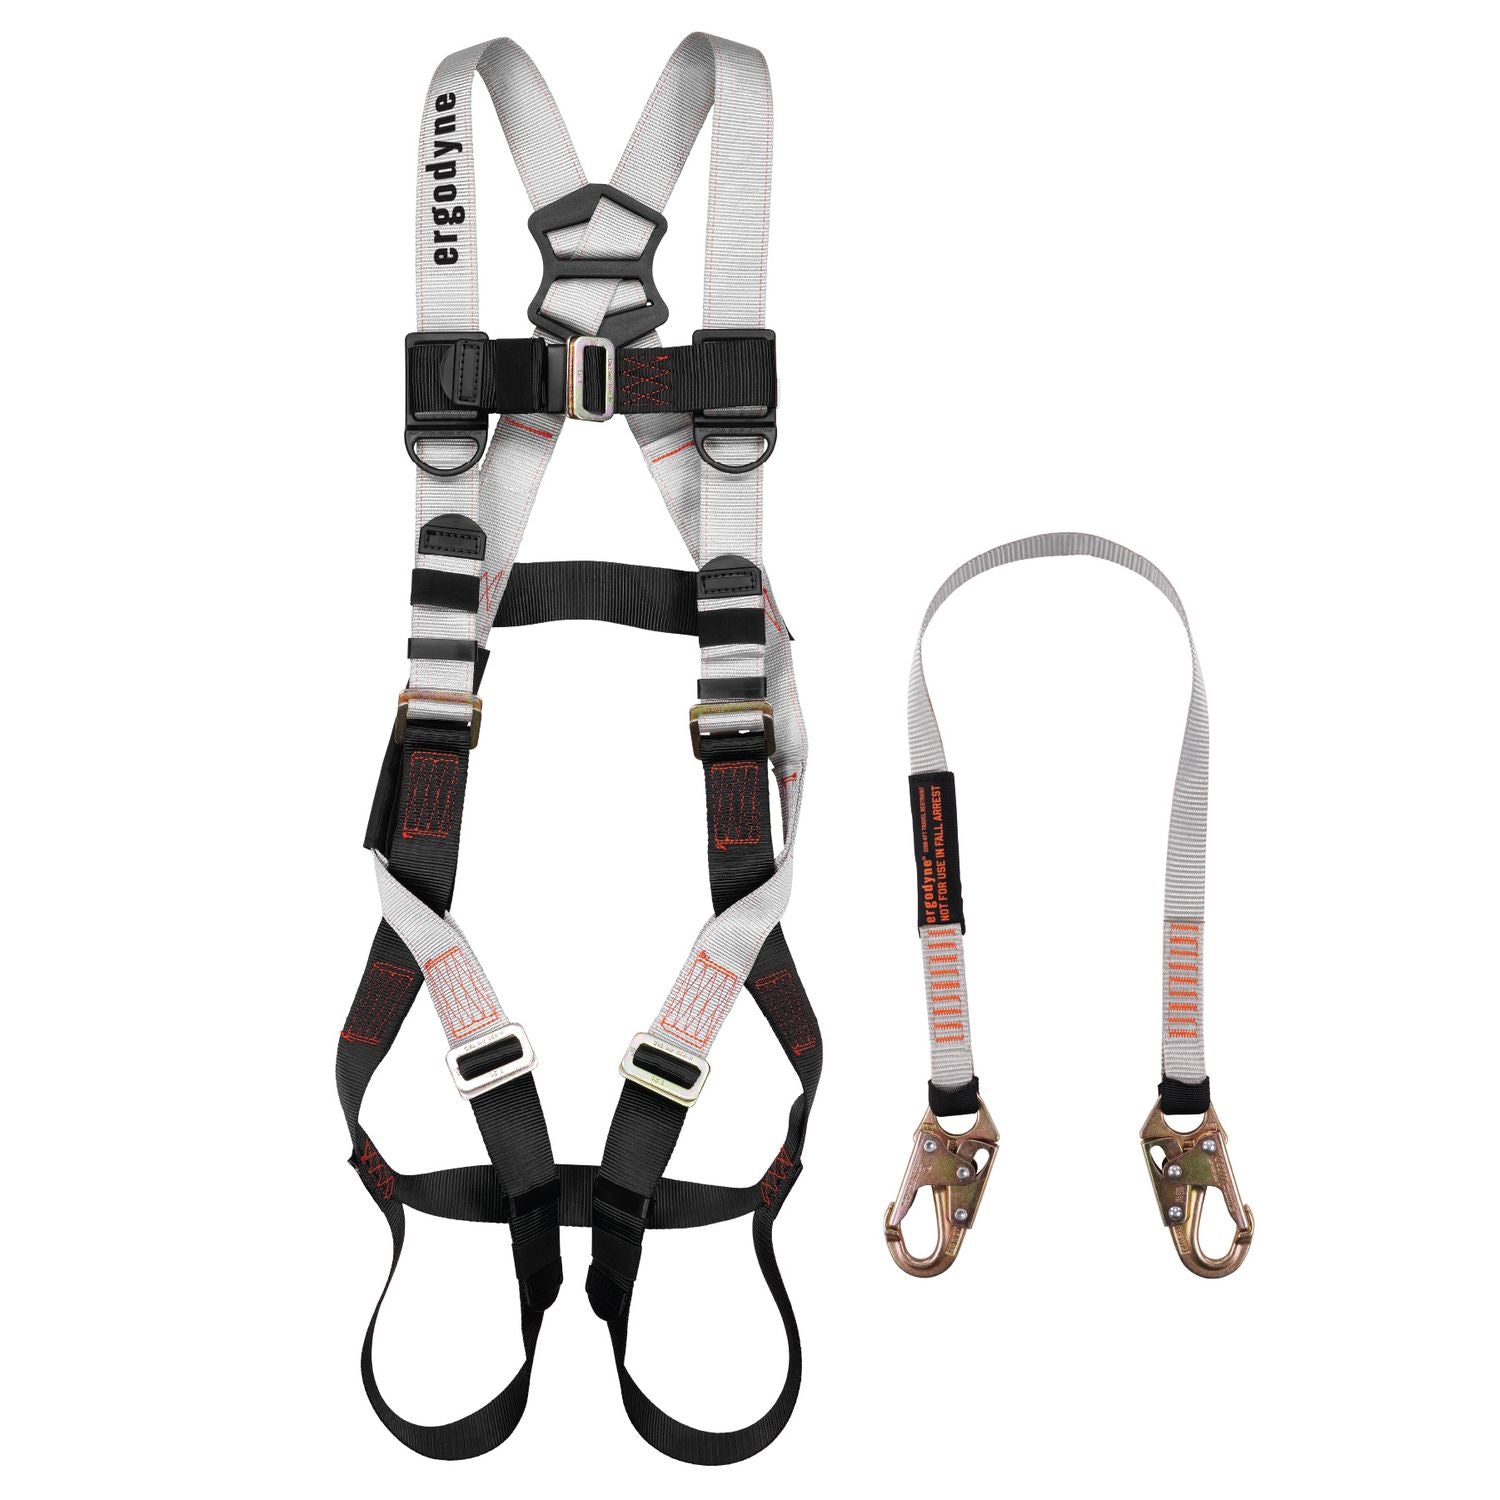 3201-harness-plus-4-ft-travel-restraint-lanyard-3197-3198-ships-in-1-3-business-days_ego19671 - 1